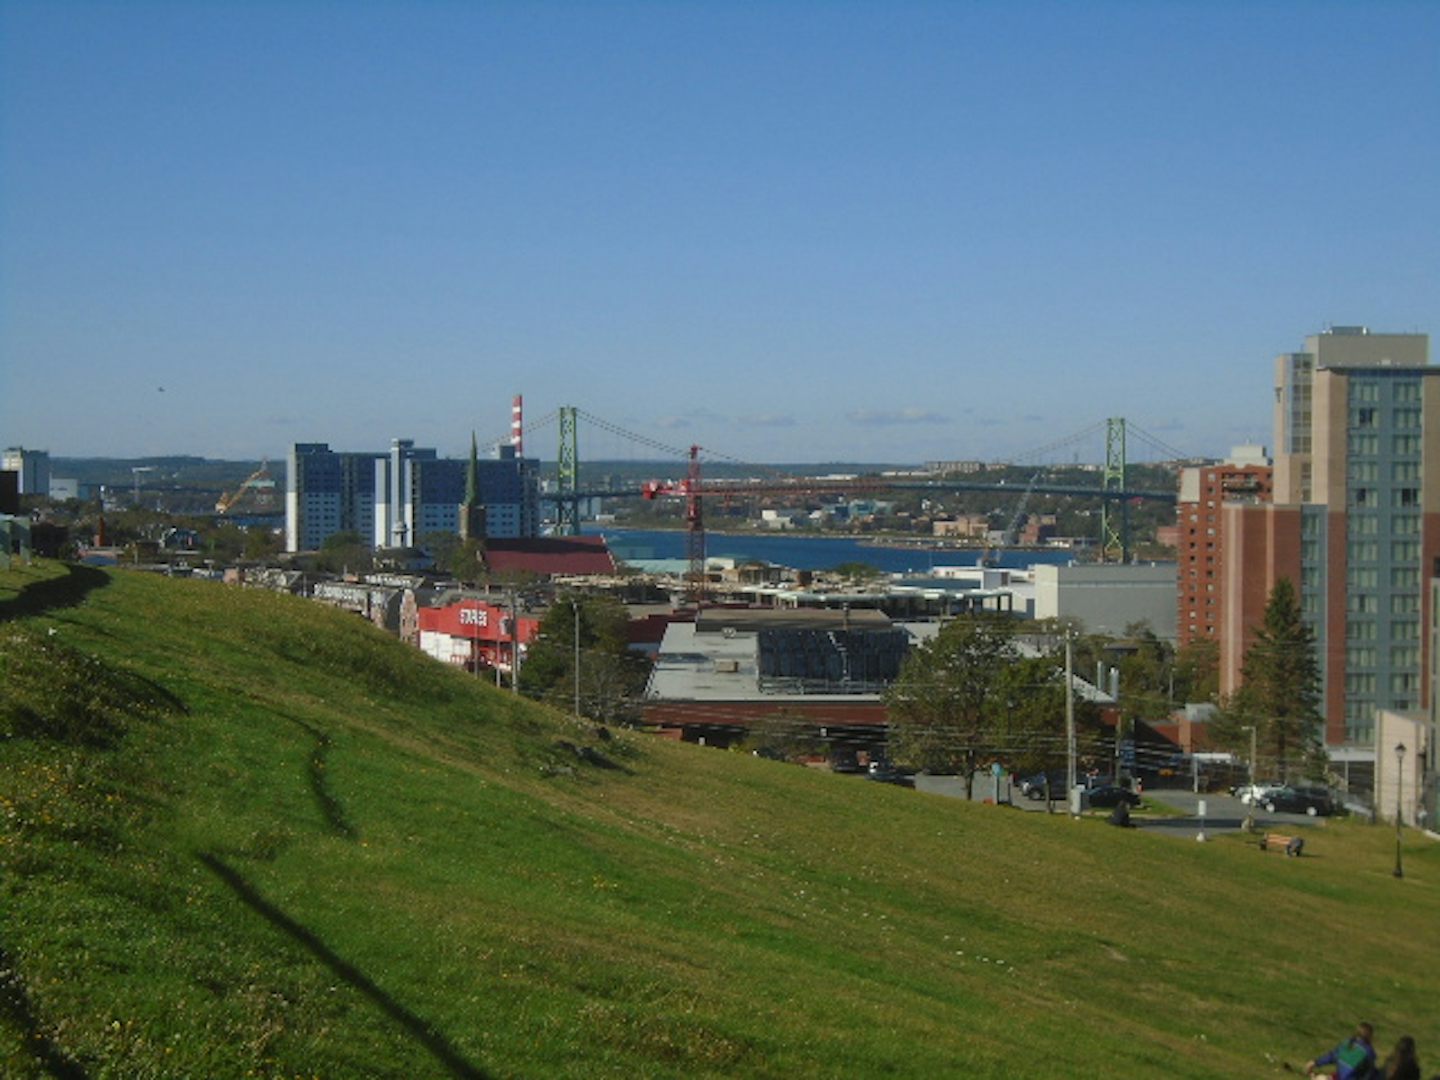 Views of Halifax from the Citadel